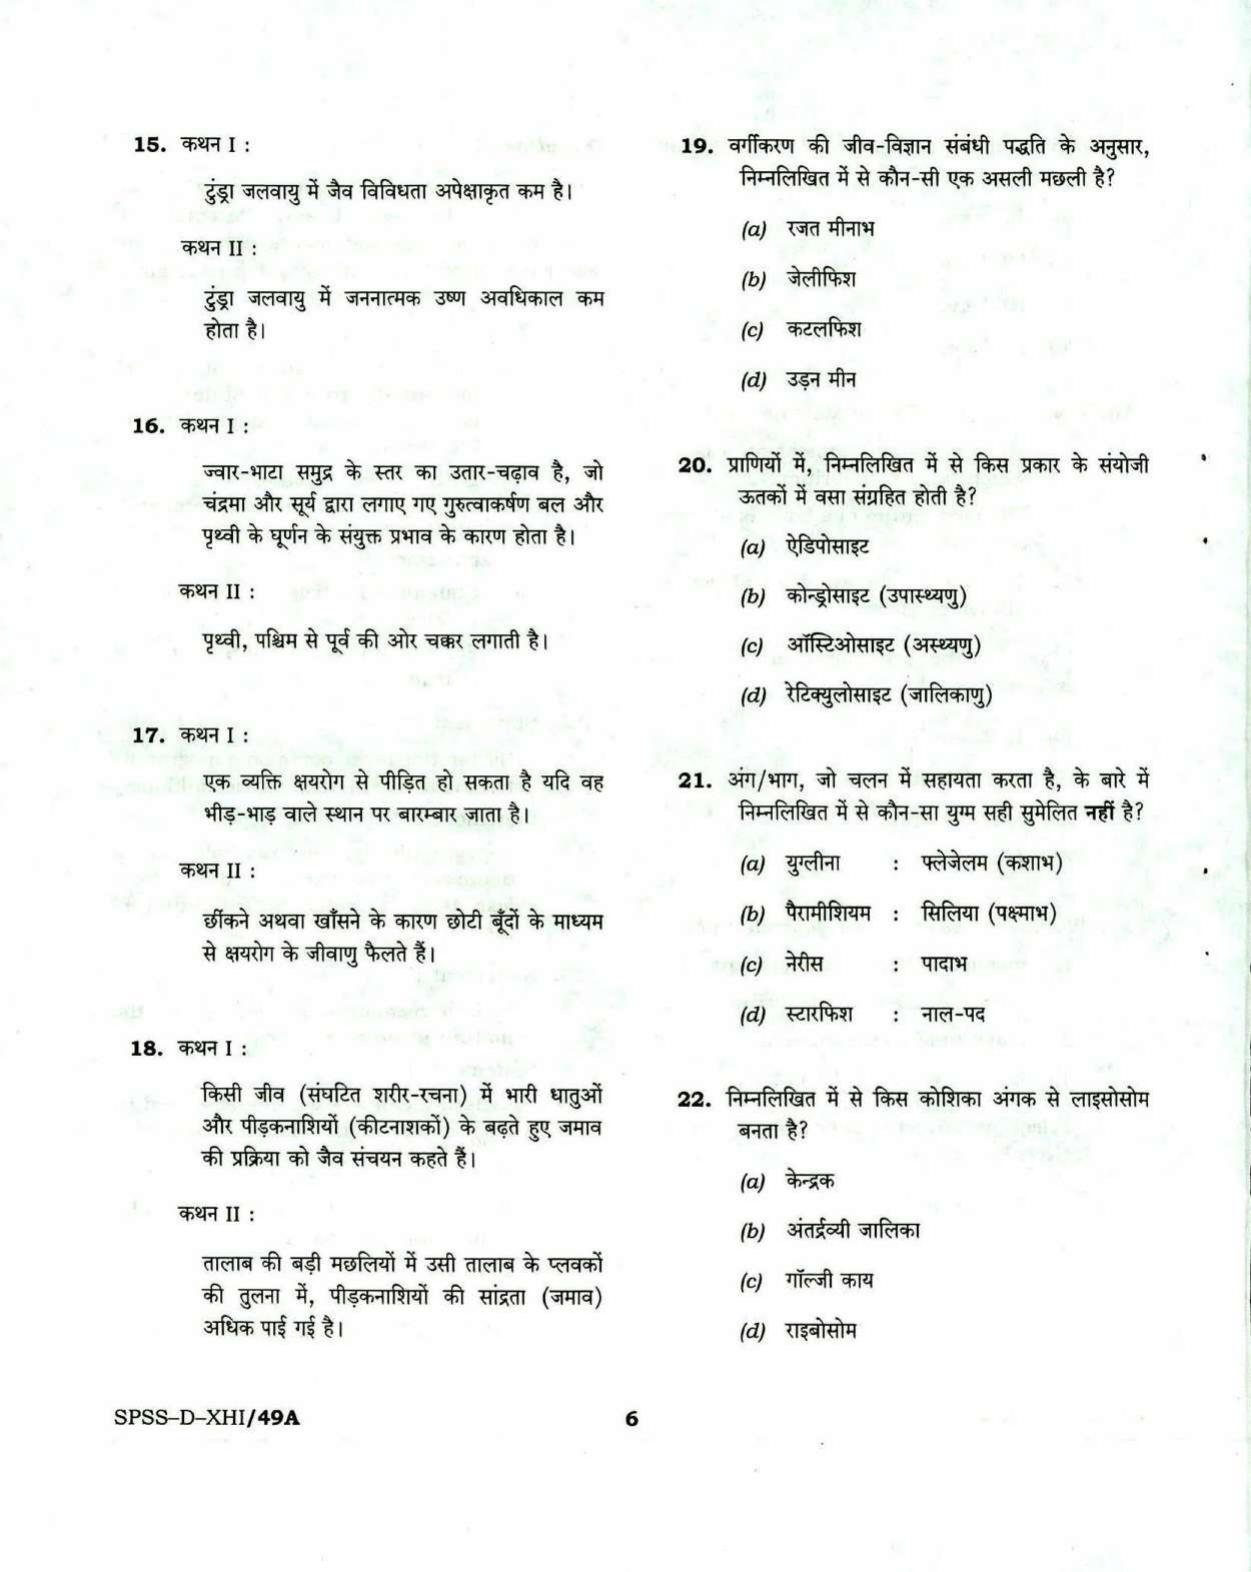 PBSSD General Knowledge Solved Papers - Page 6